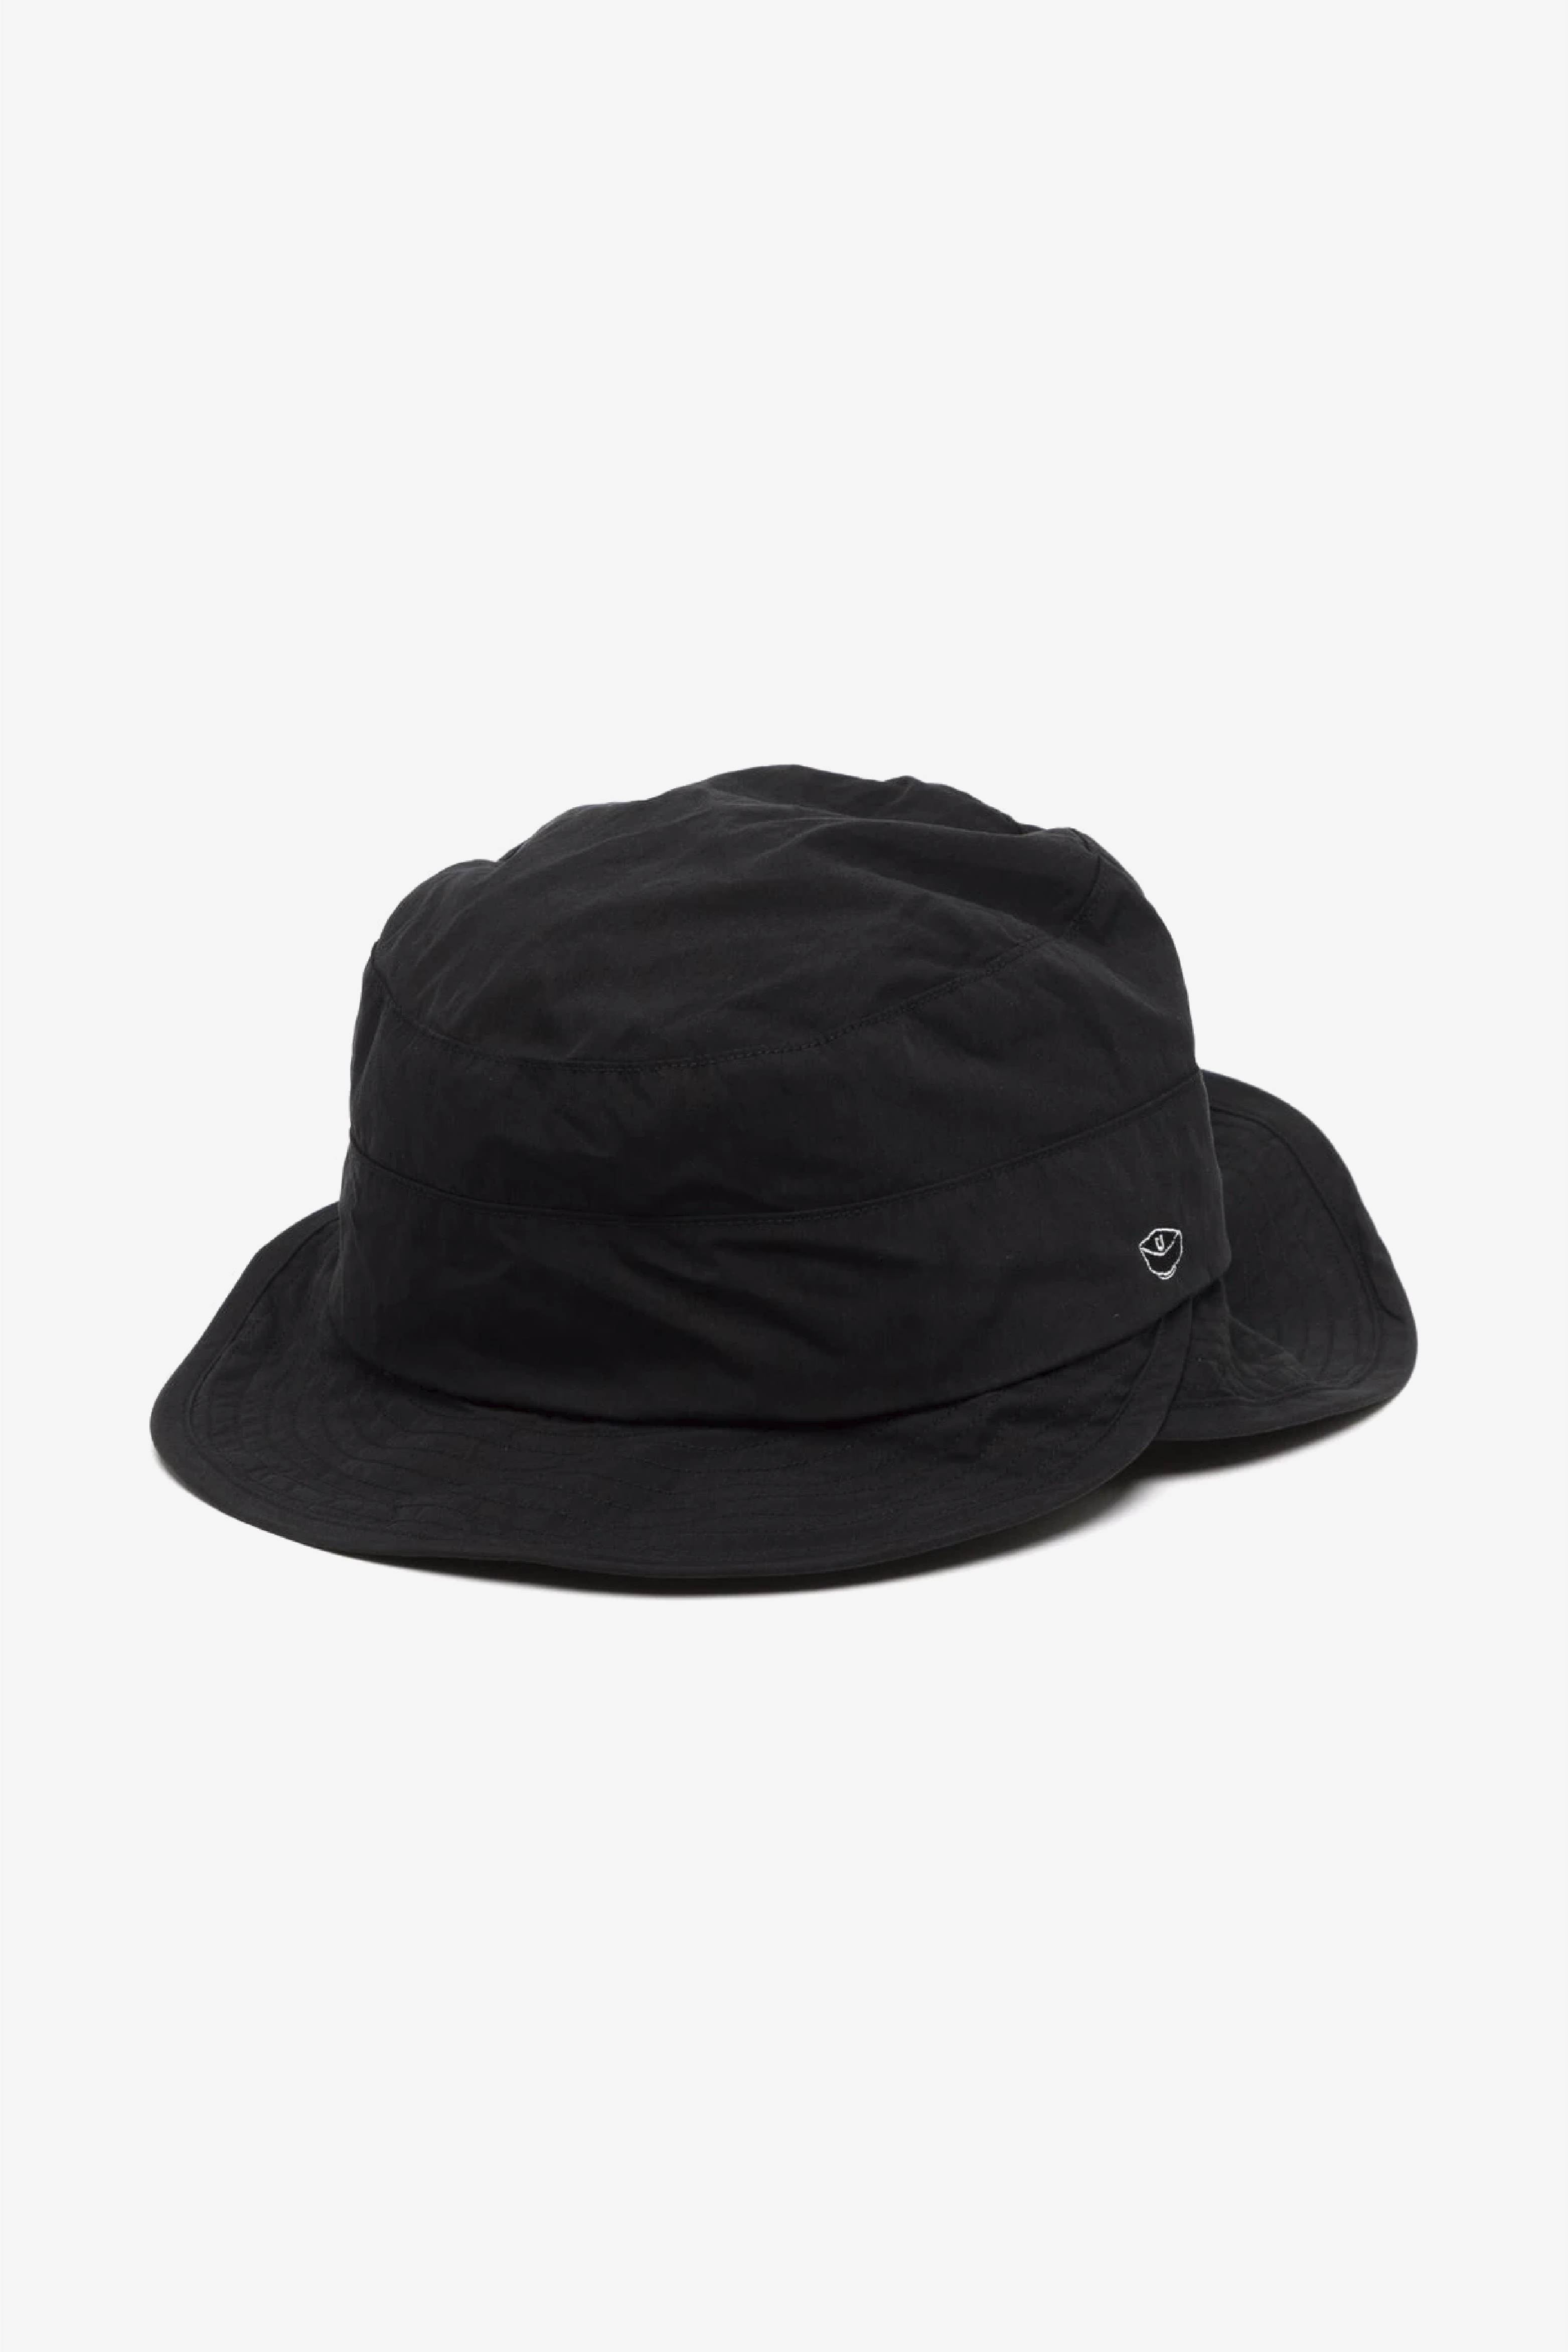 Selectshop FRAME - UNDERCOVER Crossover Brim Logo Embroidered Hat All-Accessories Dubai